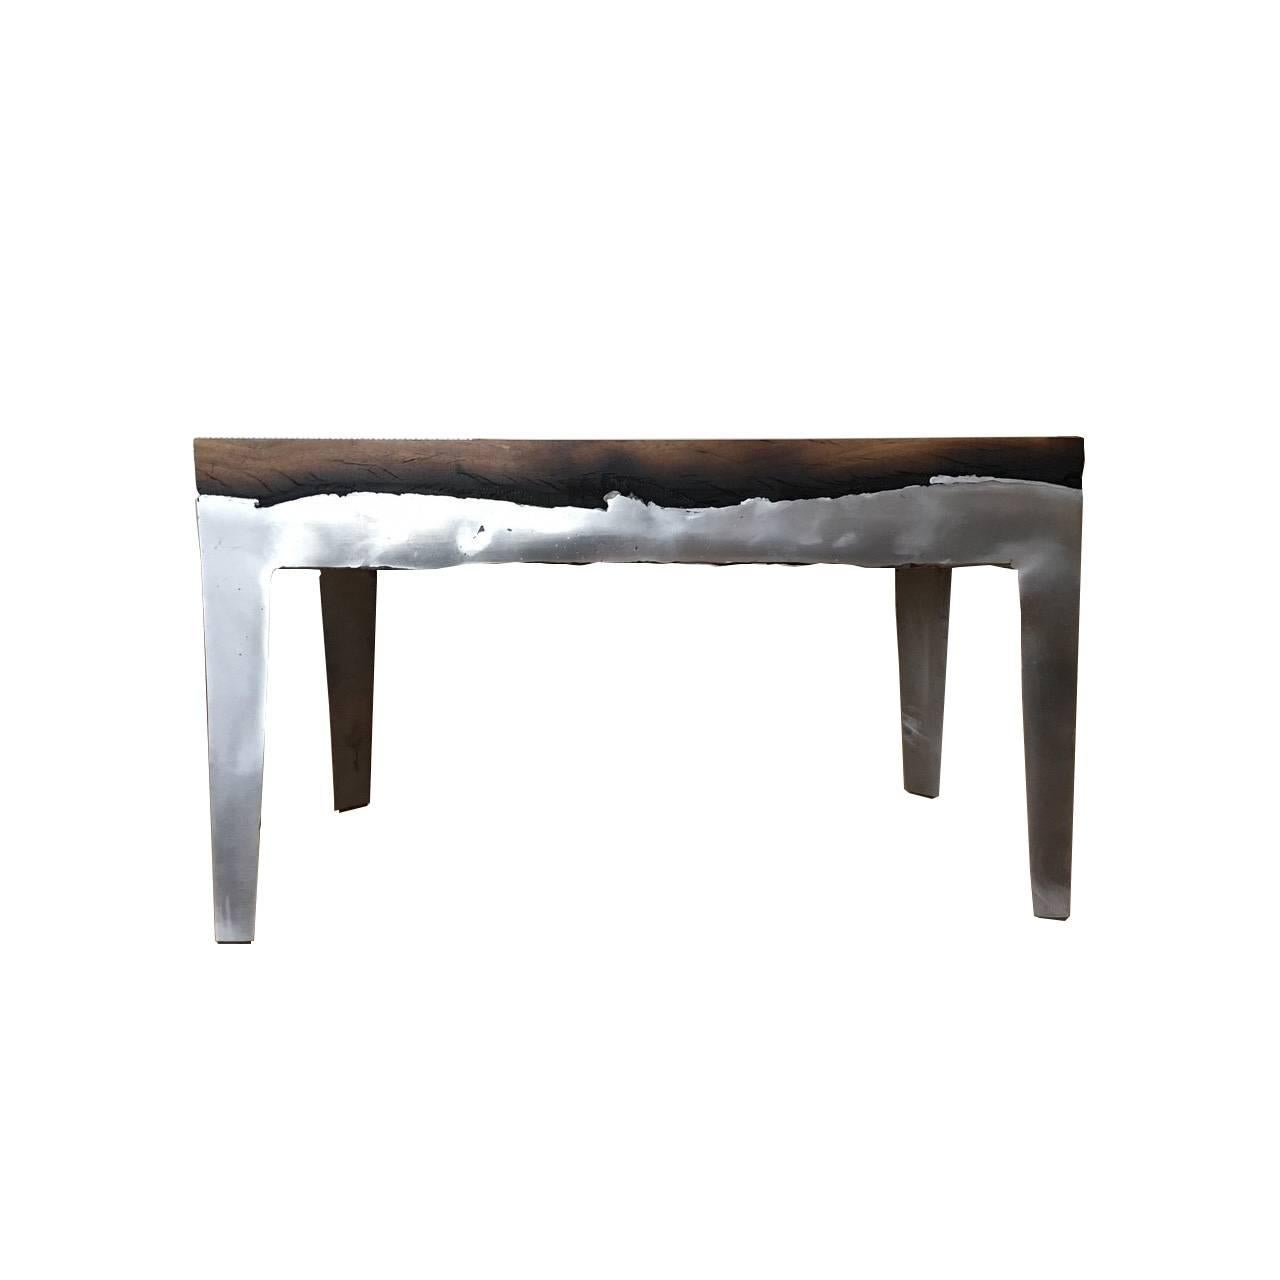 Hilla Shamia’s acclaimed wood casting furniture is made in a unique technique of casting aluminium or brass on natural wood. It seeks to capture the unpredictable and dramatic encounter between the natural elements of wood and metal. 

Wood